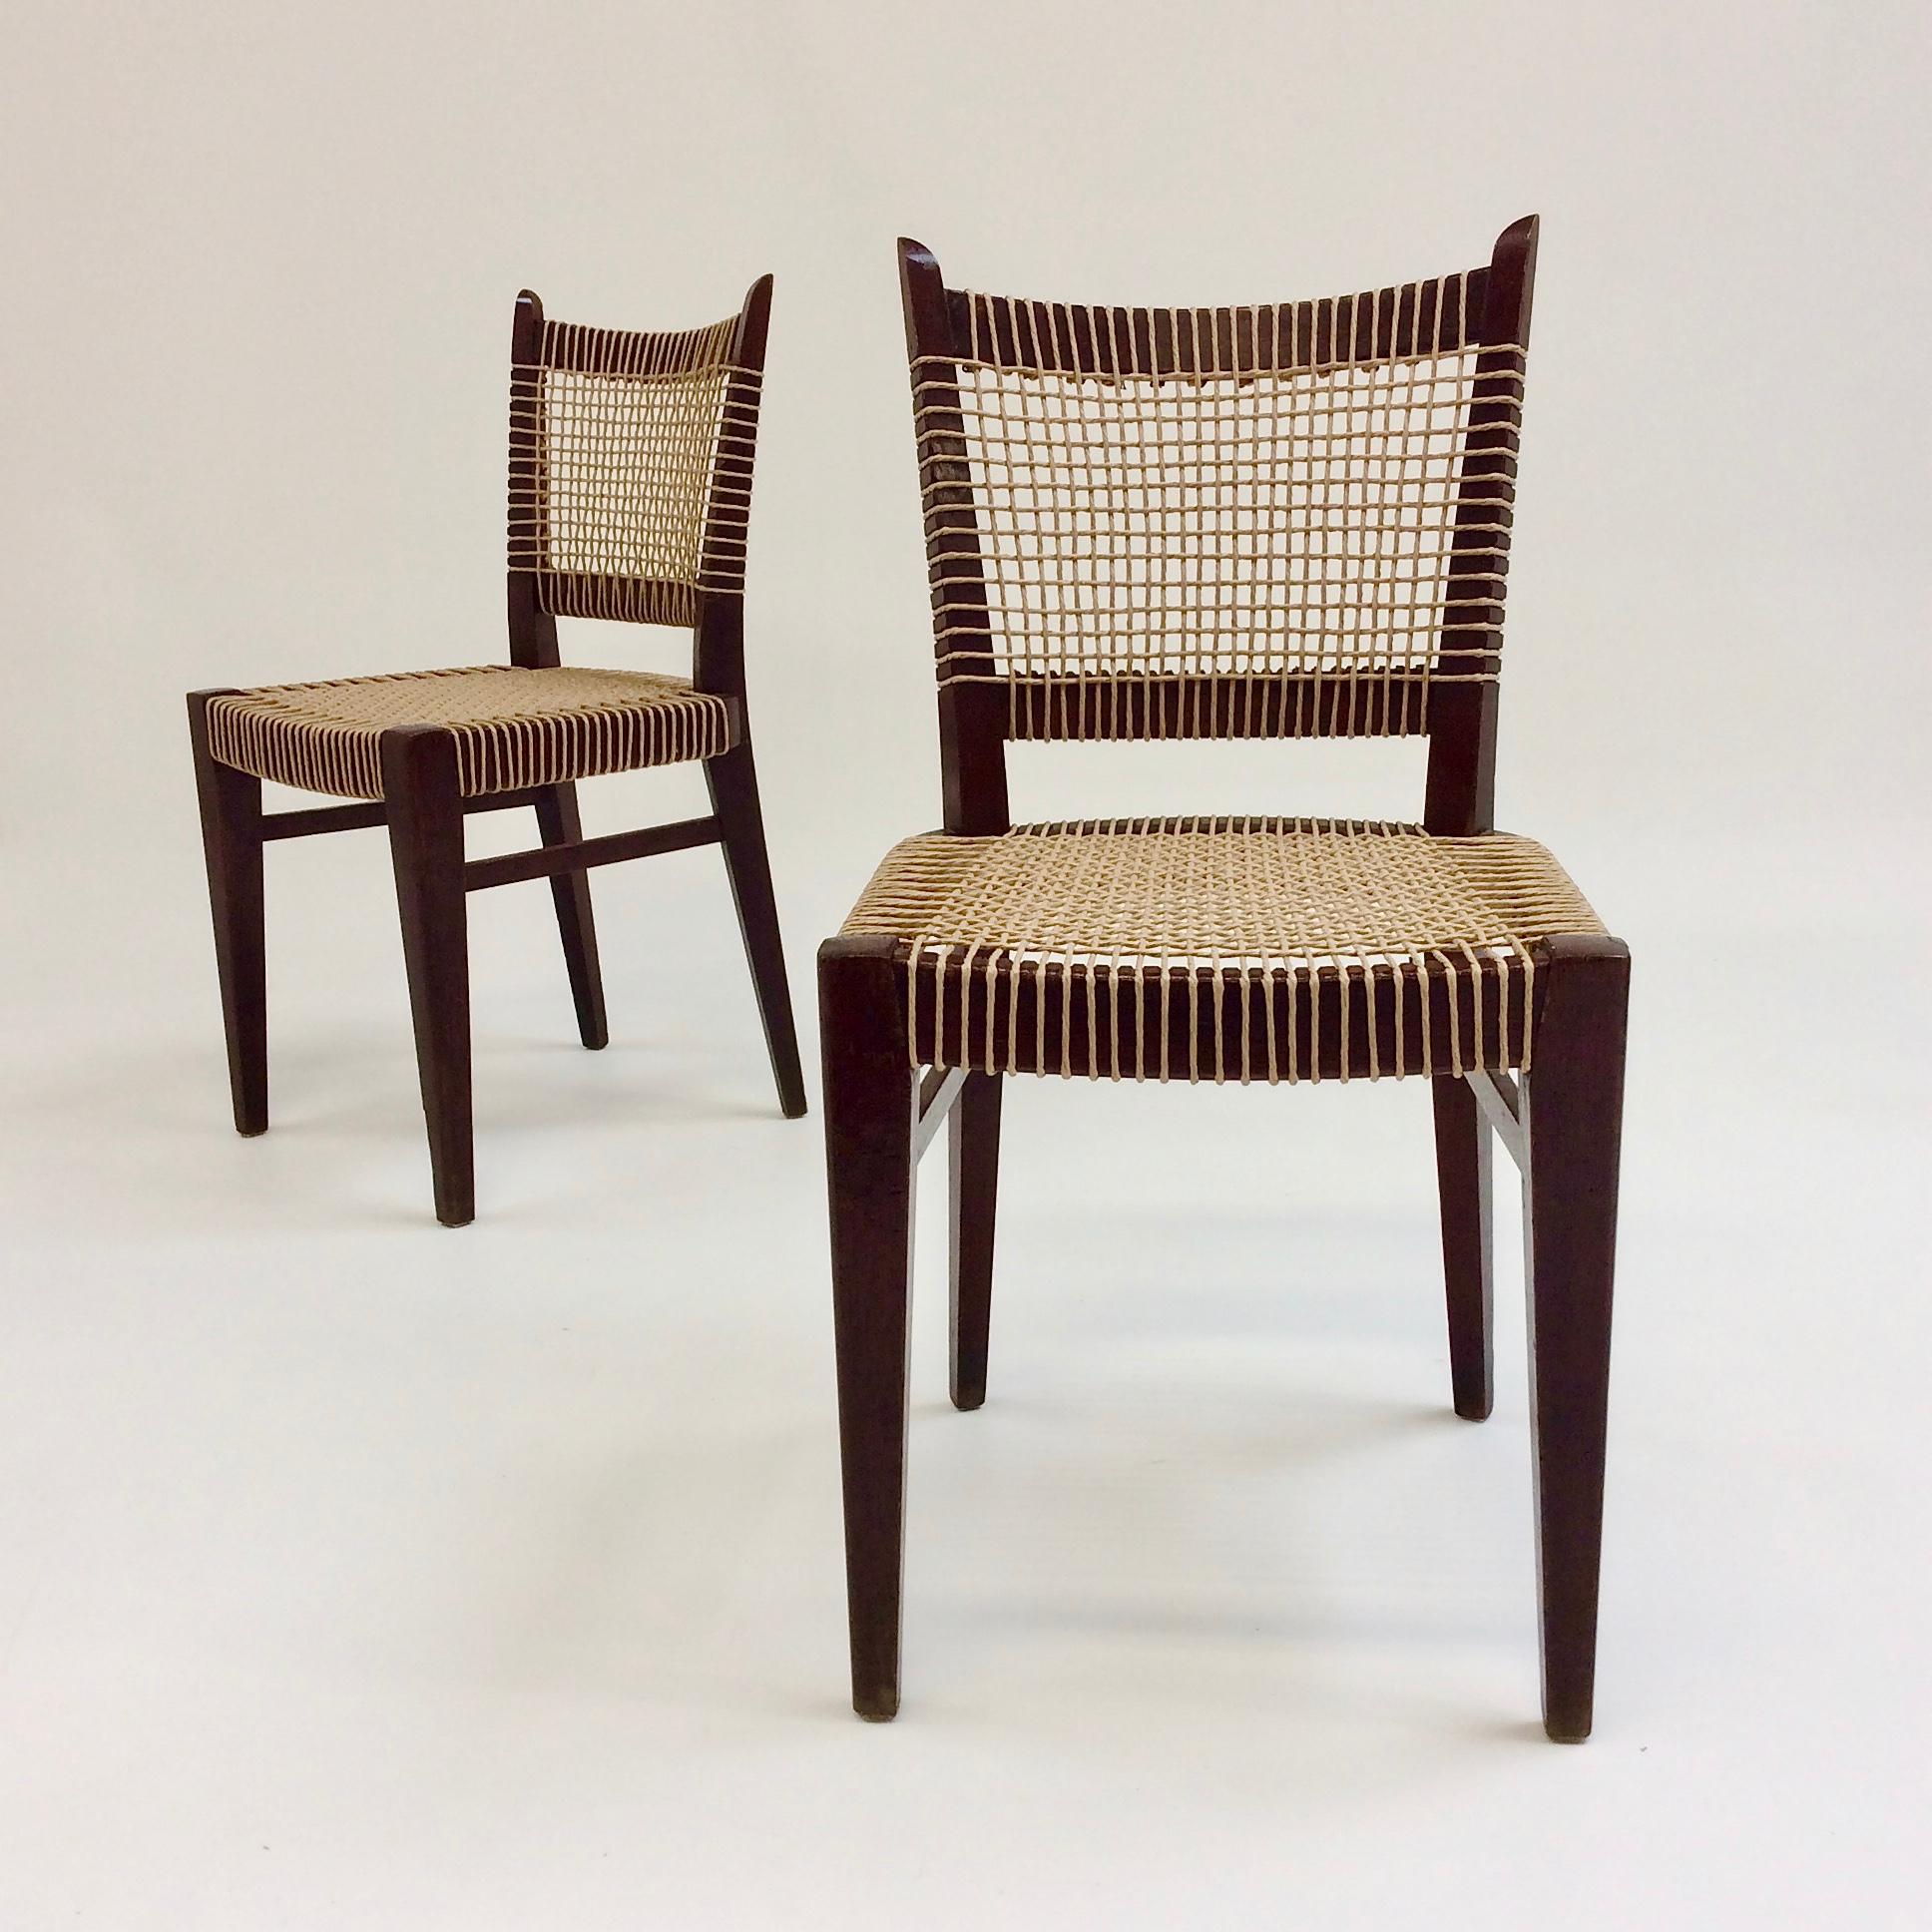 Nice pair of decorative chairs, circa 1950, France.
Woven straw and dark wood.
Dimensions: 83 cm H, seat height: 45 cm, 40 cm D, 42 cm W.
Wood in original condition, new woven straw.
All purchases are covered by our Buyer Protection